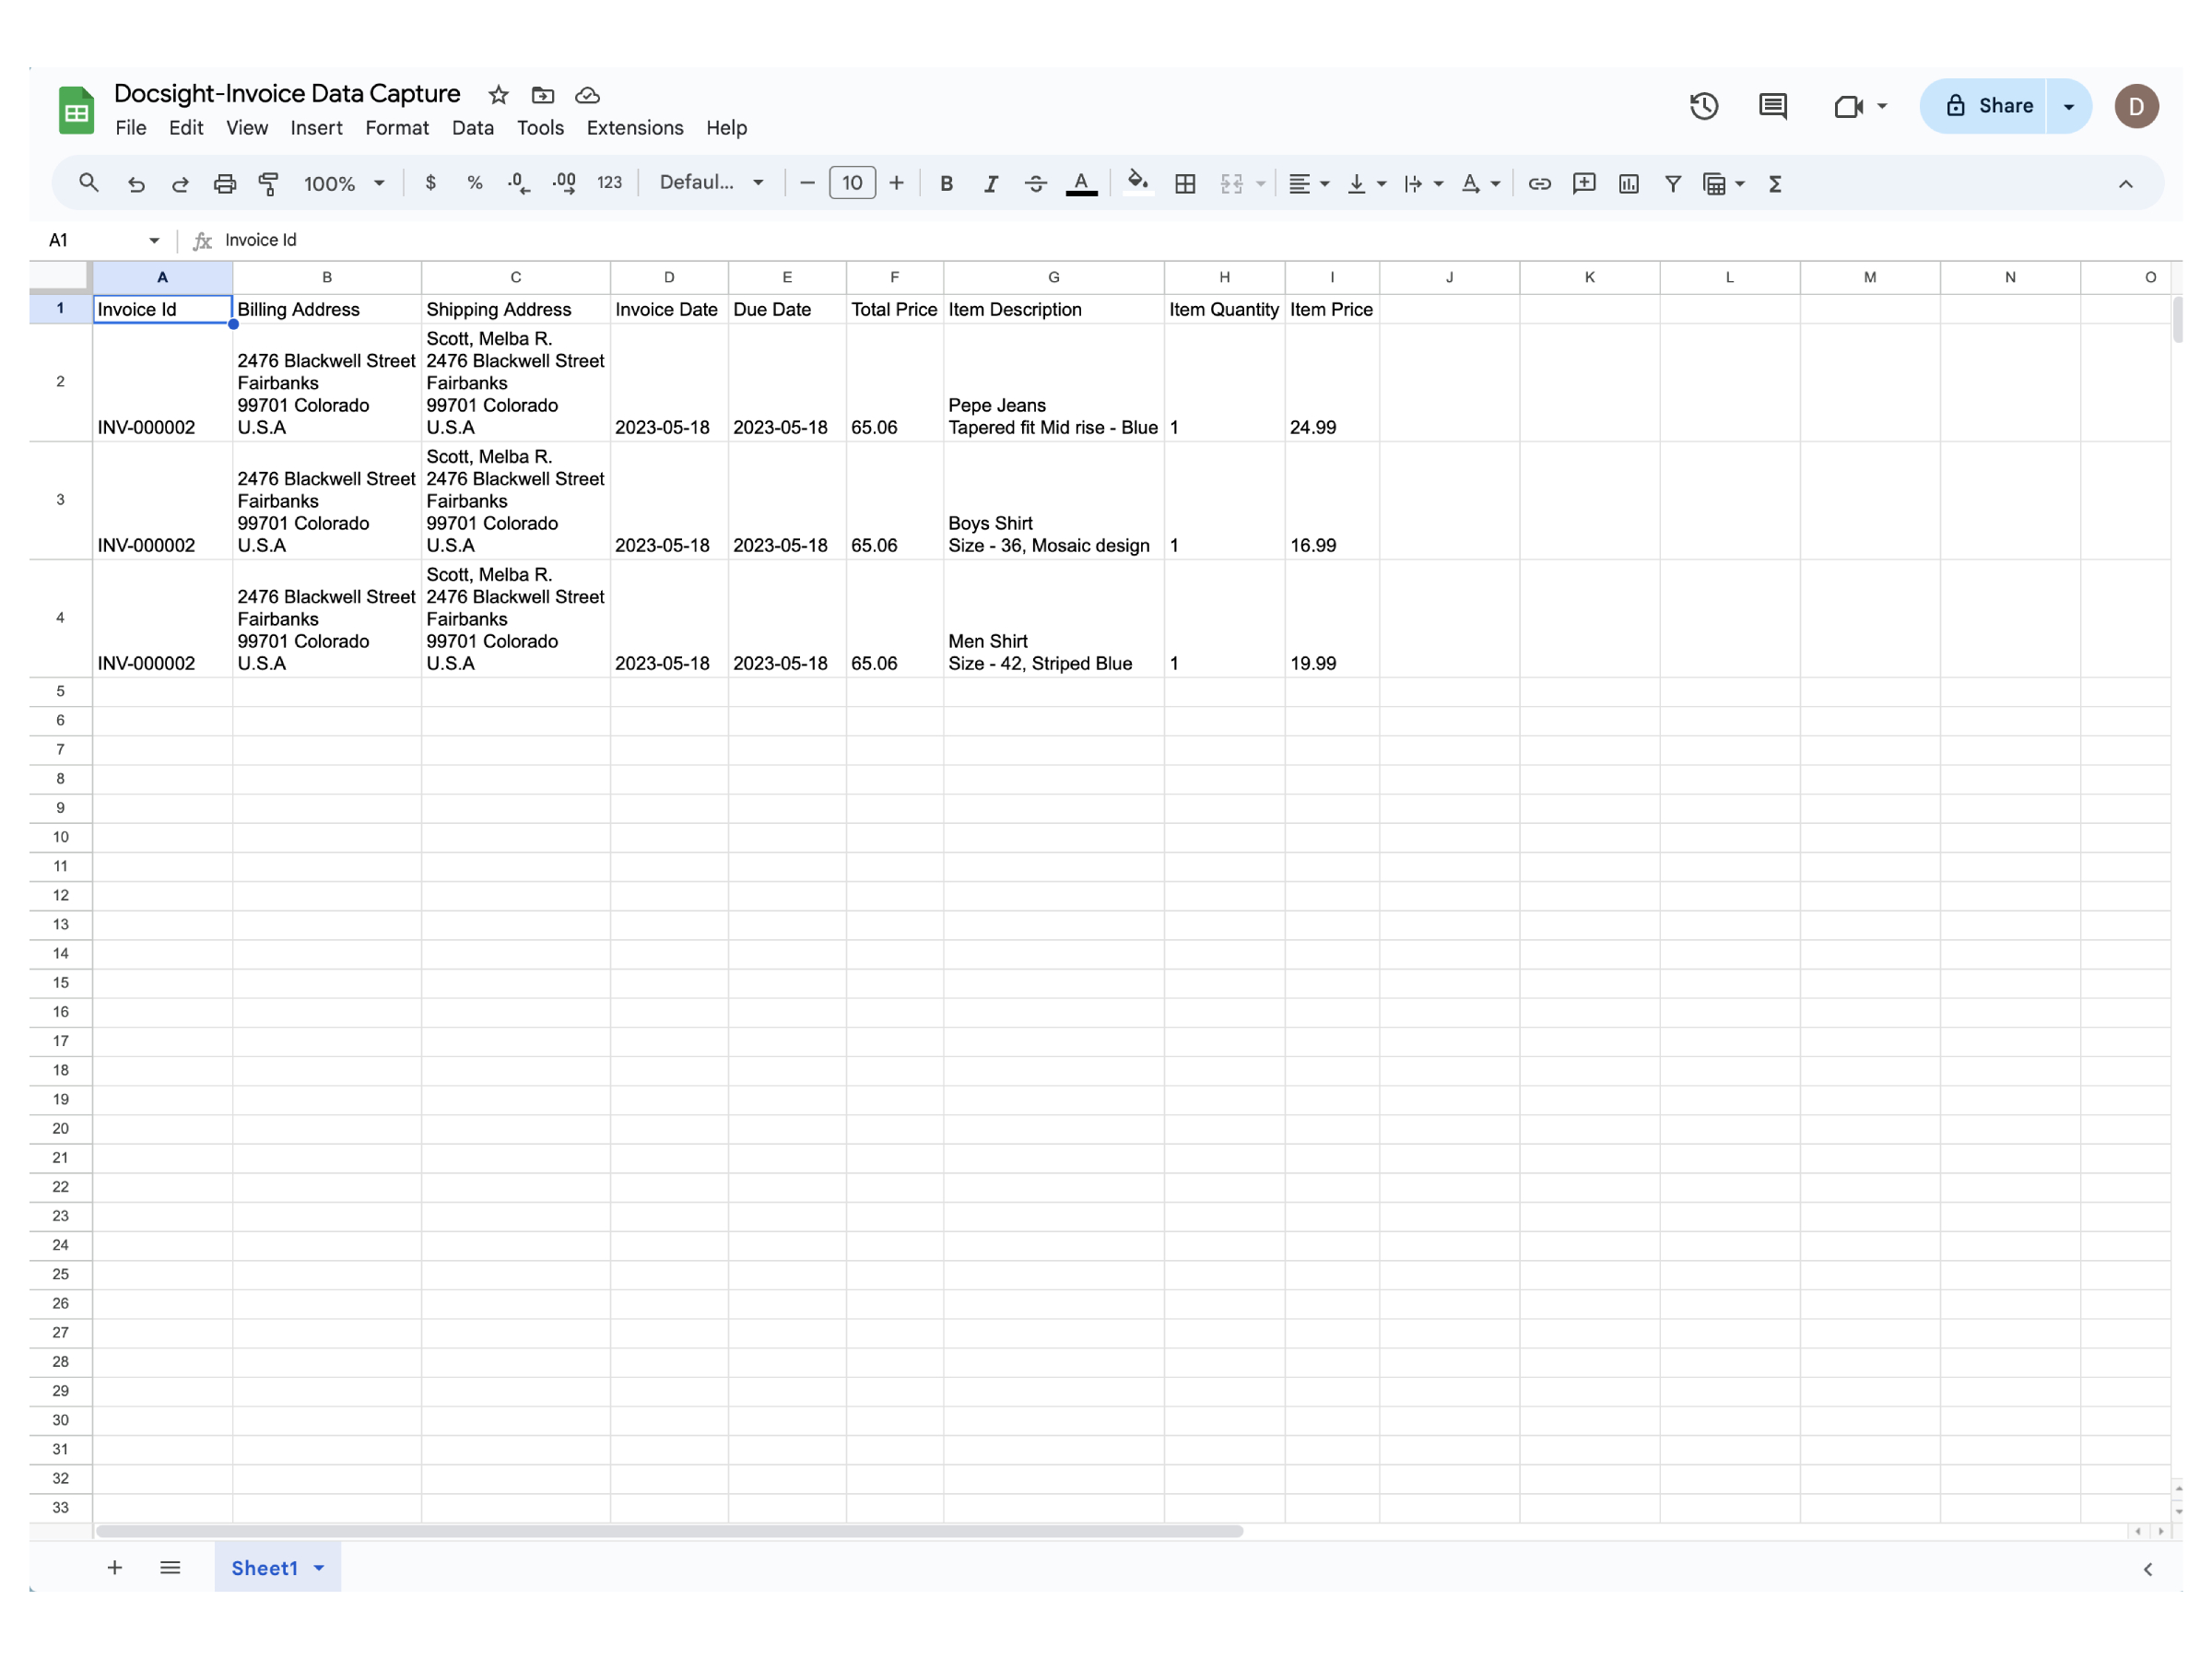 Invoice Data Captured in Sheets